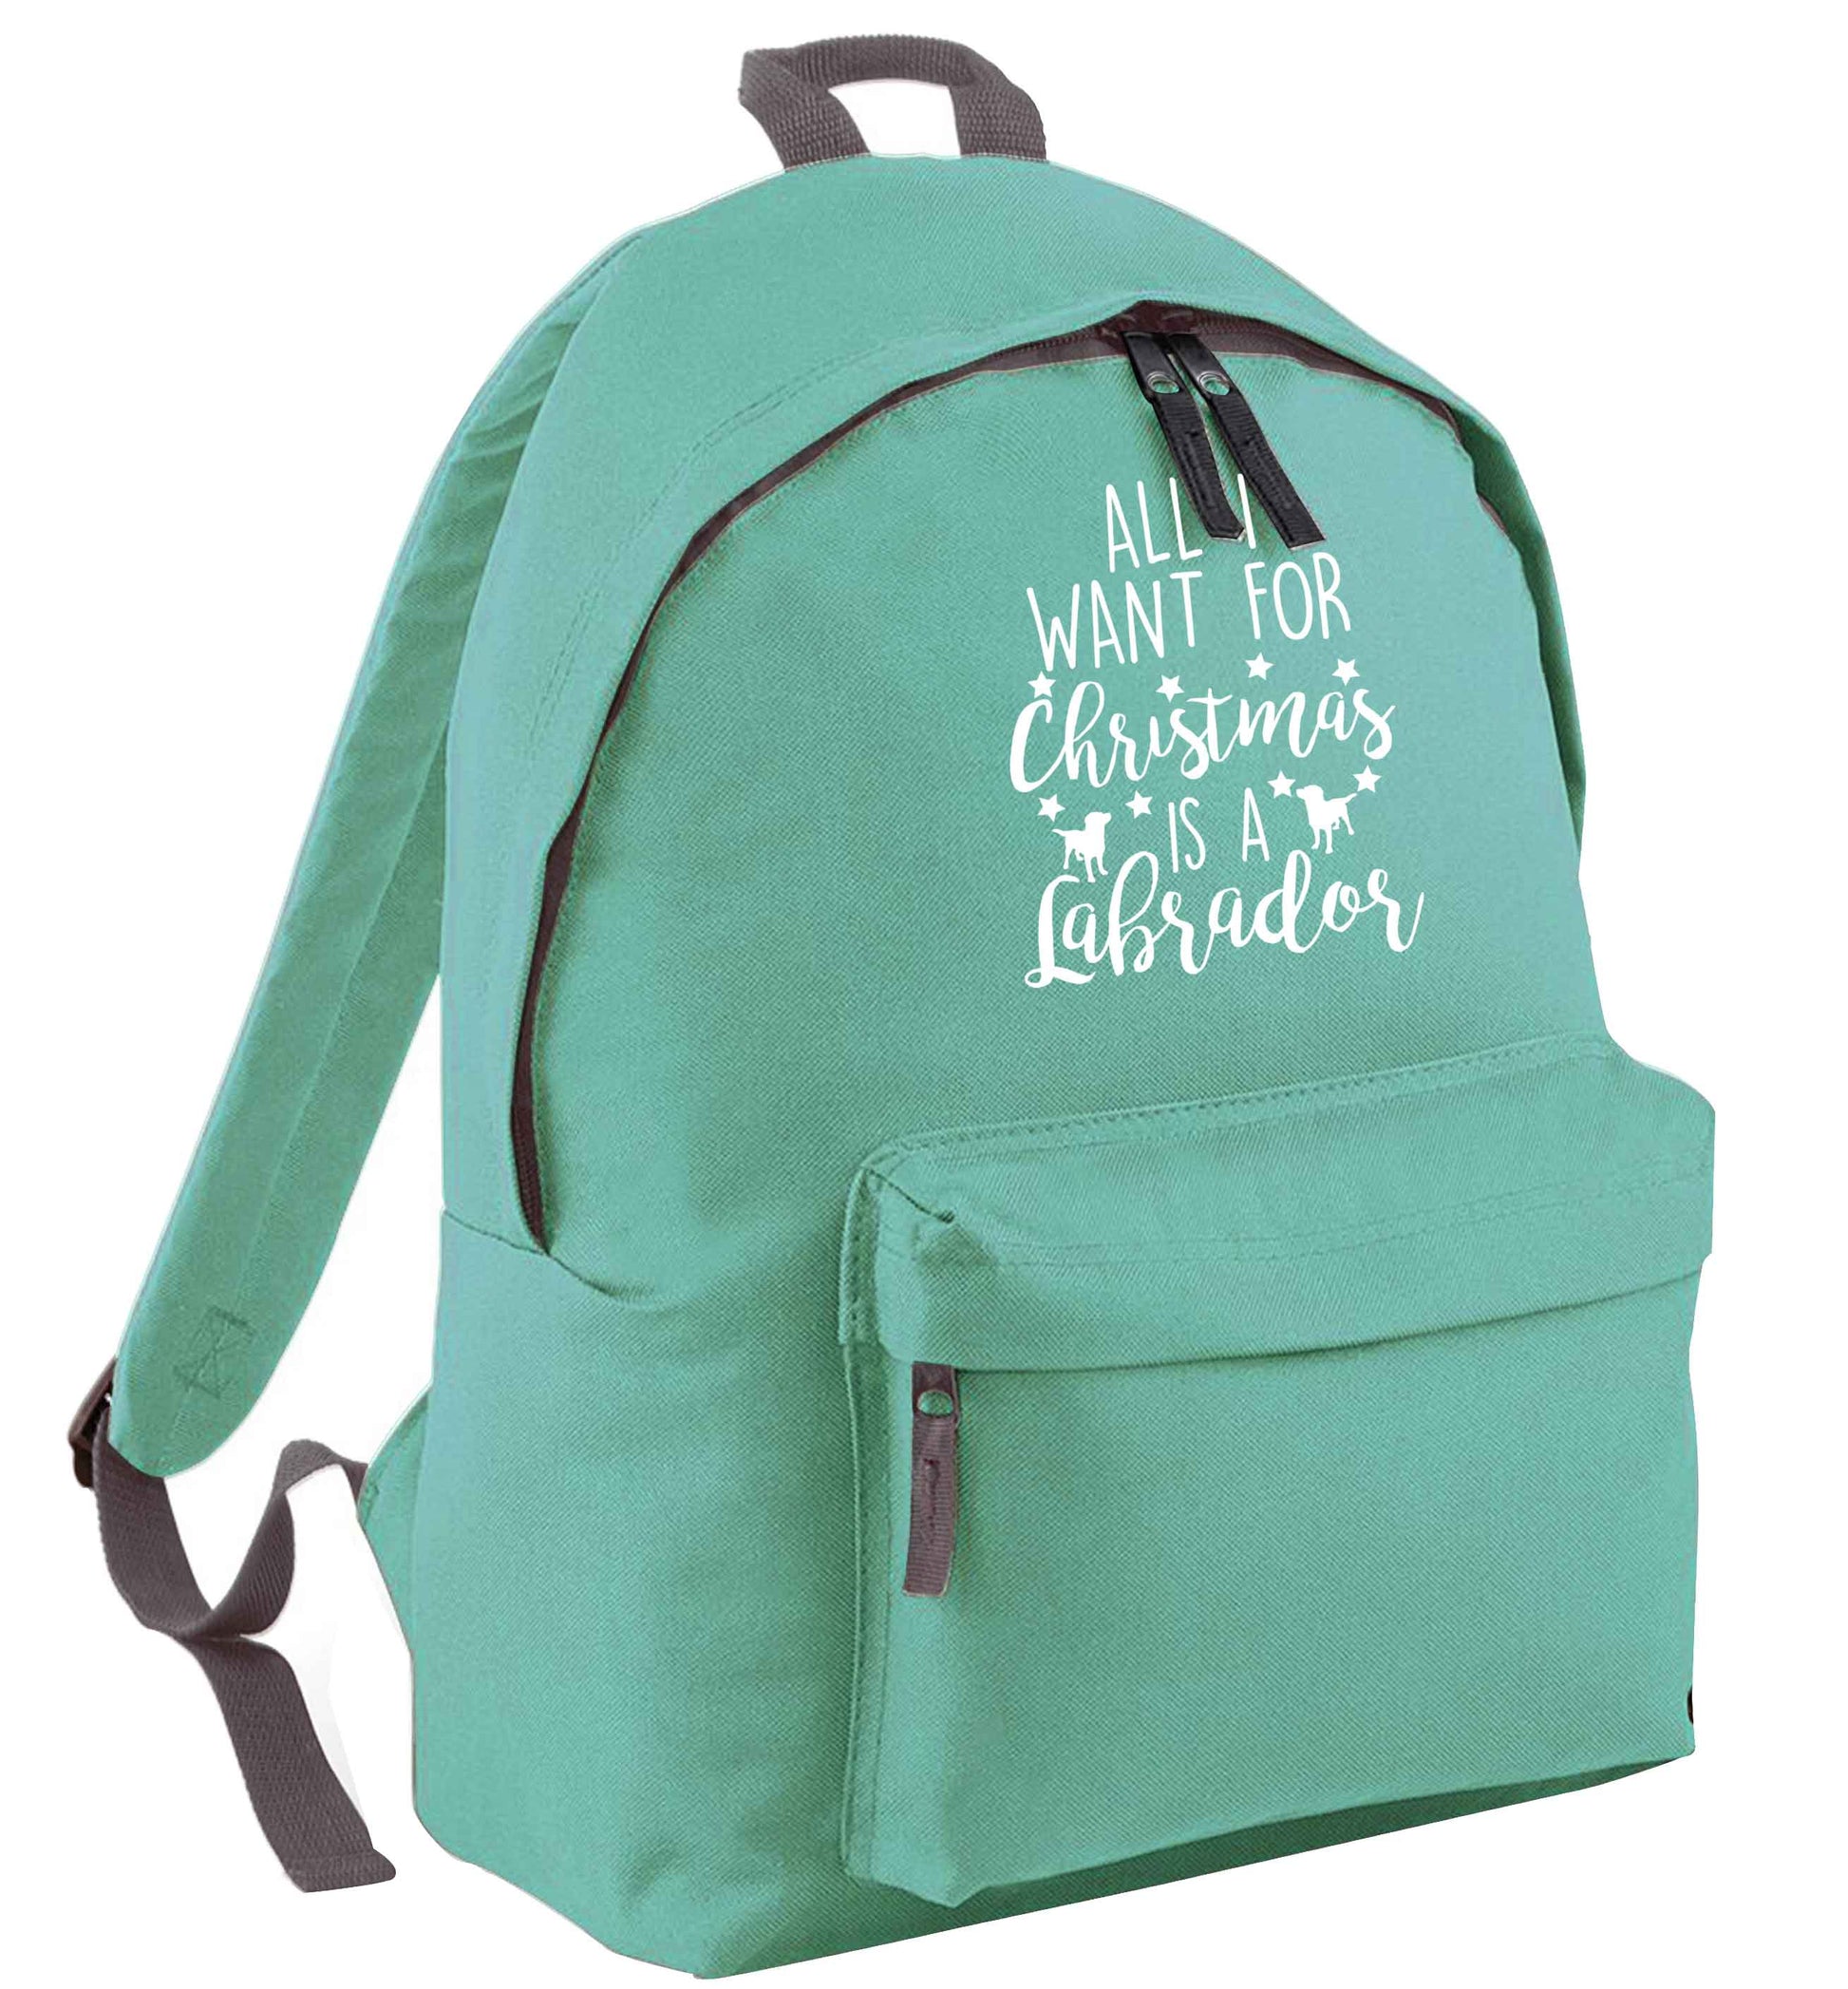 All I want for Christmas is a labrador mint adults backpack